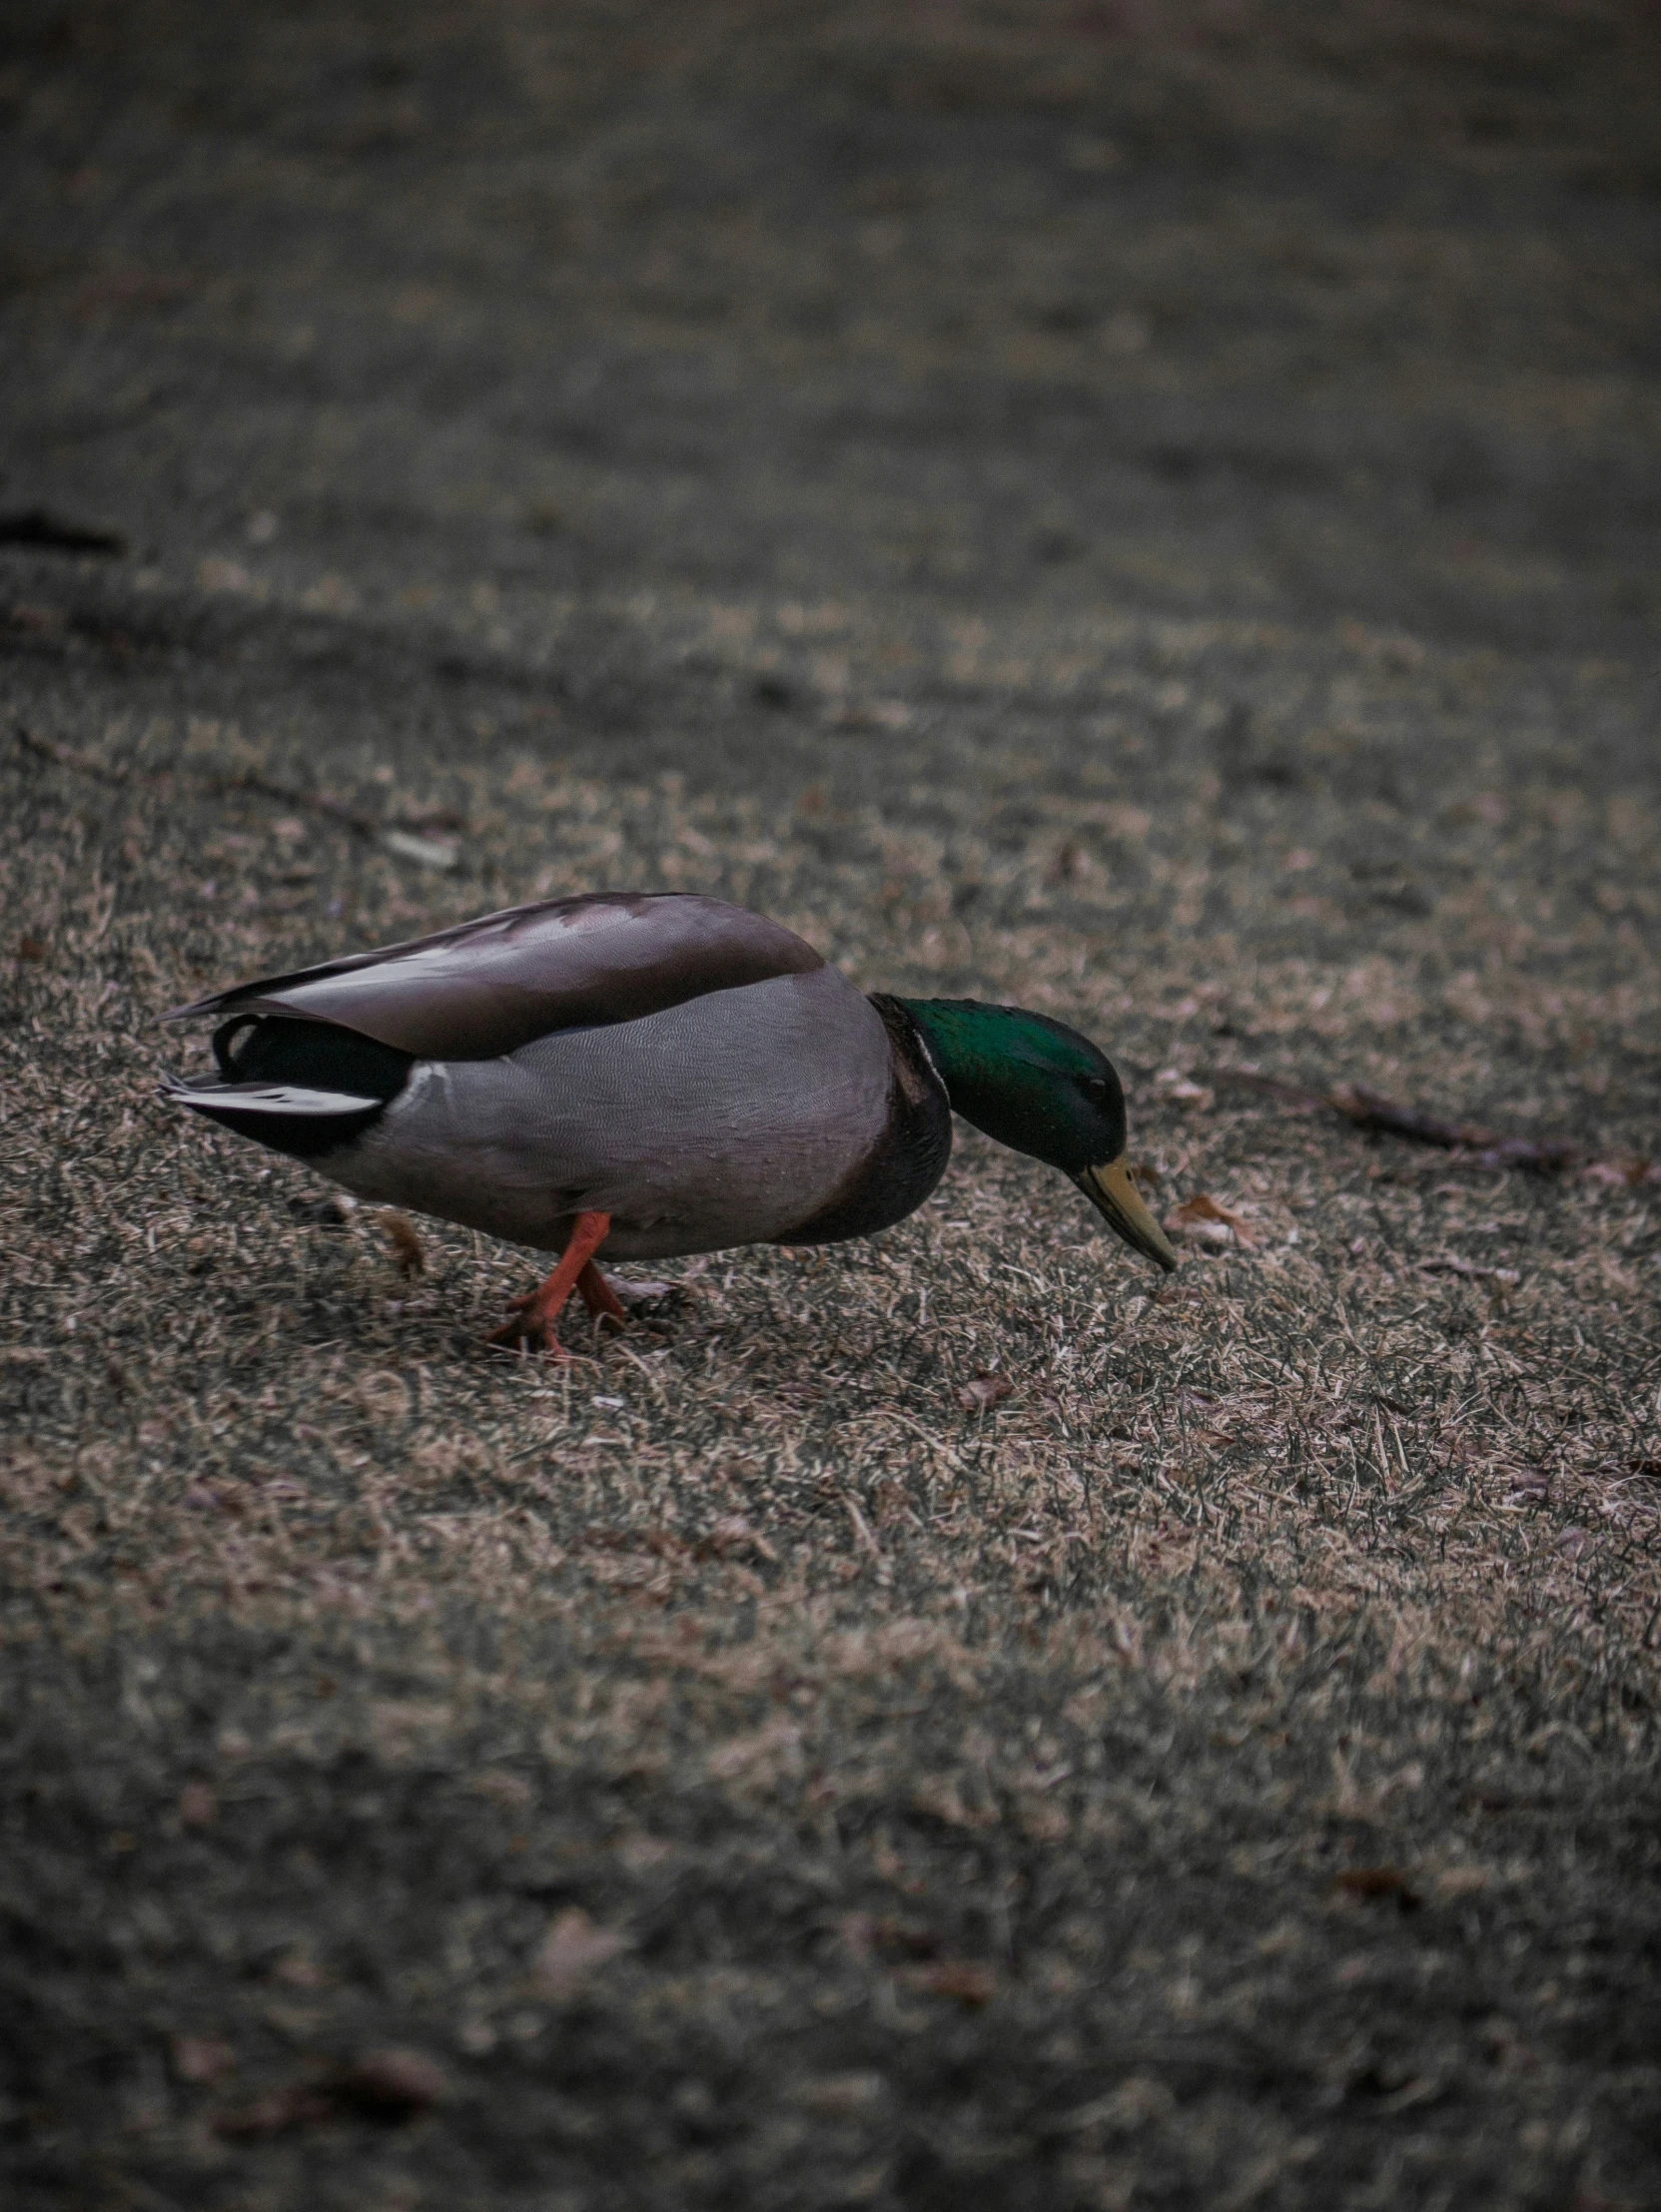 this is a mallard walking across the pavement